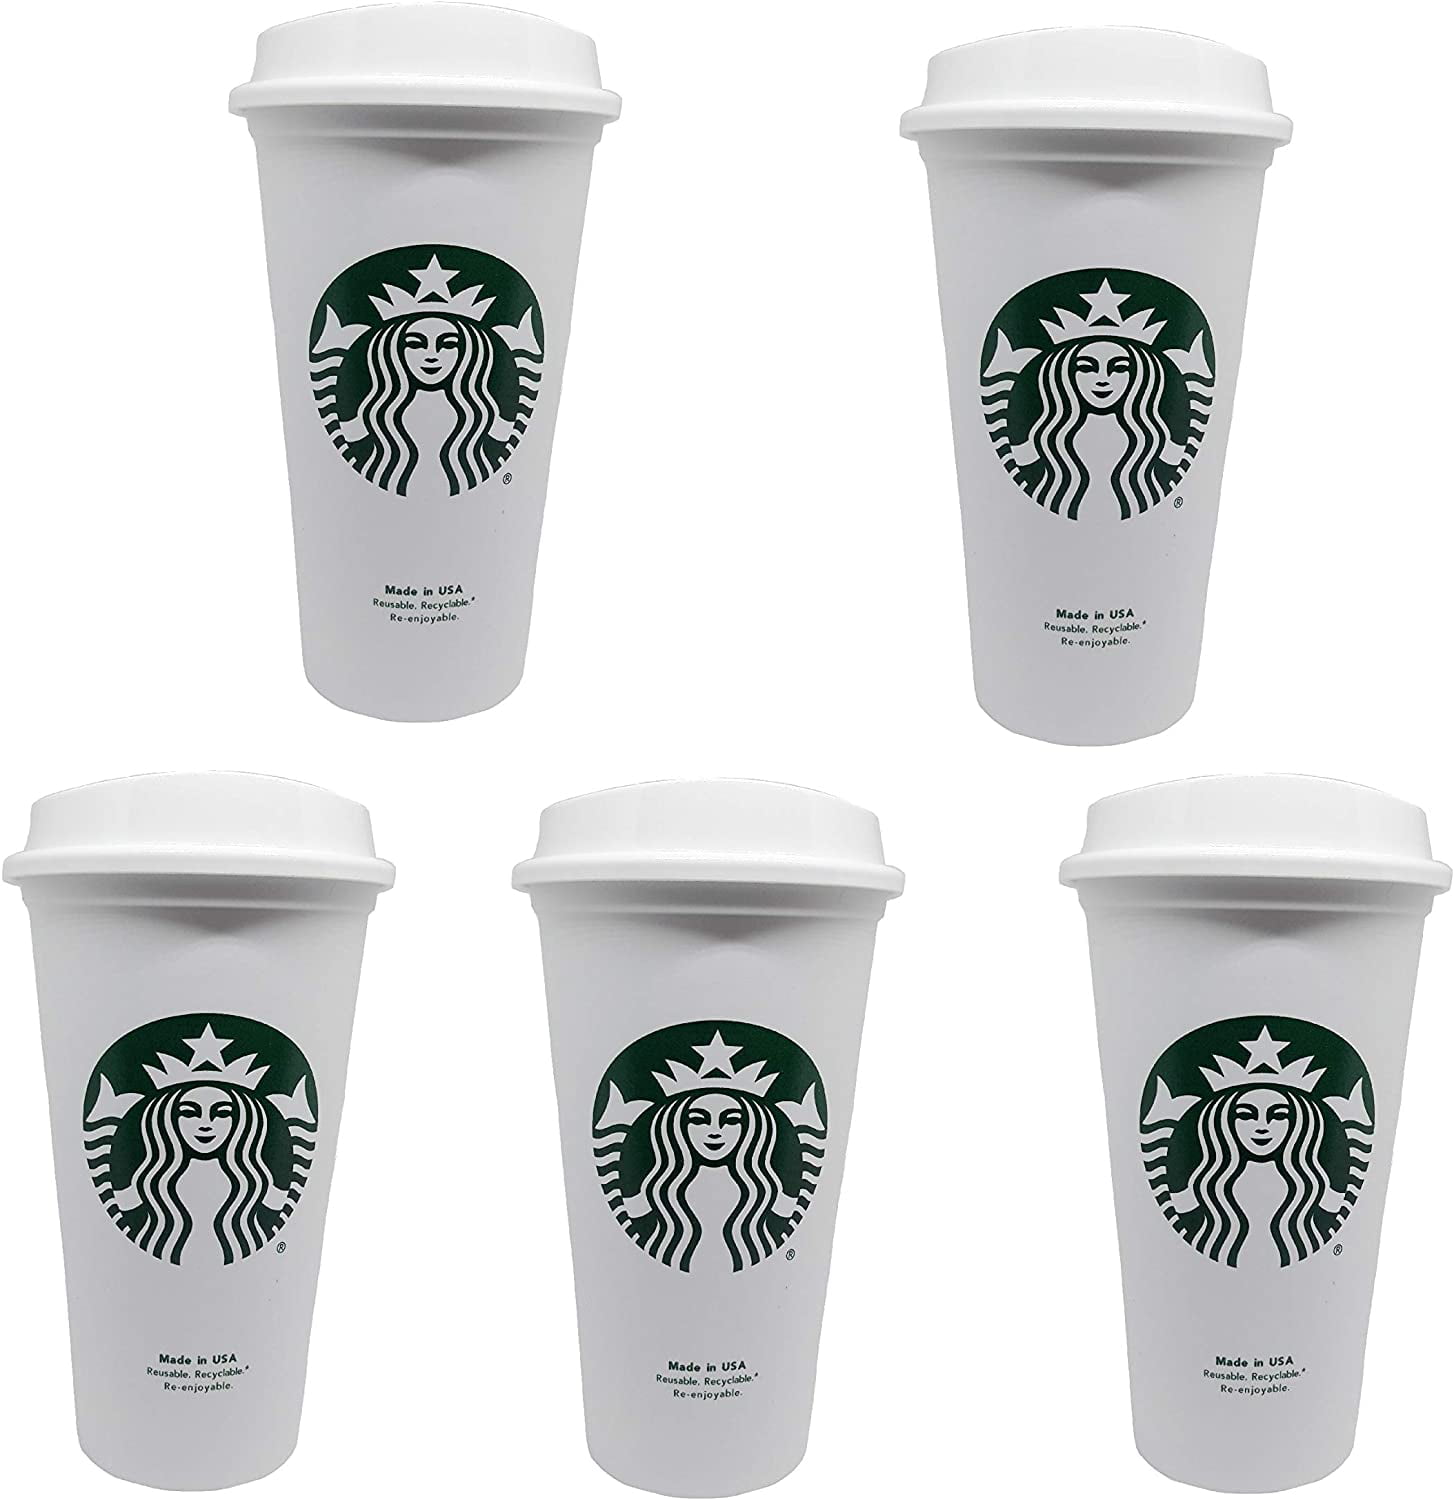 Starbucks Reusable Travel Cup To Go Coffee Cup Grande 16 Oz 5 Pack